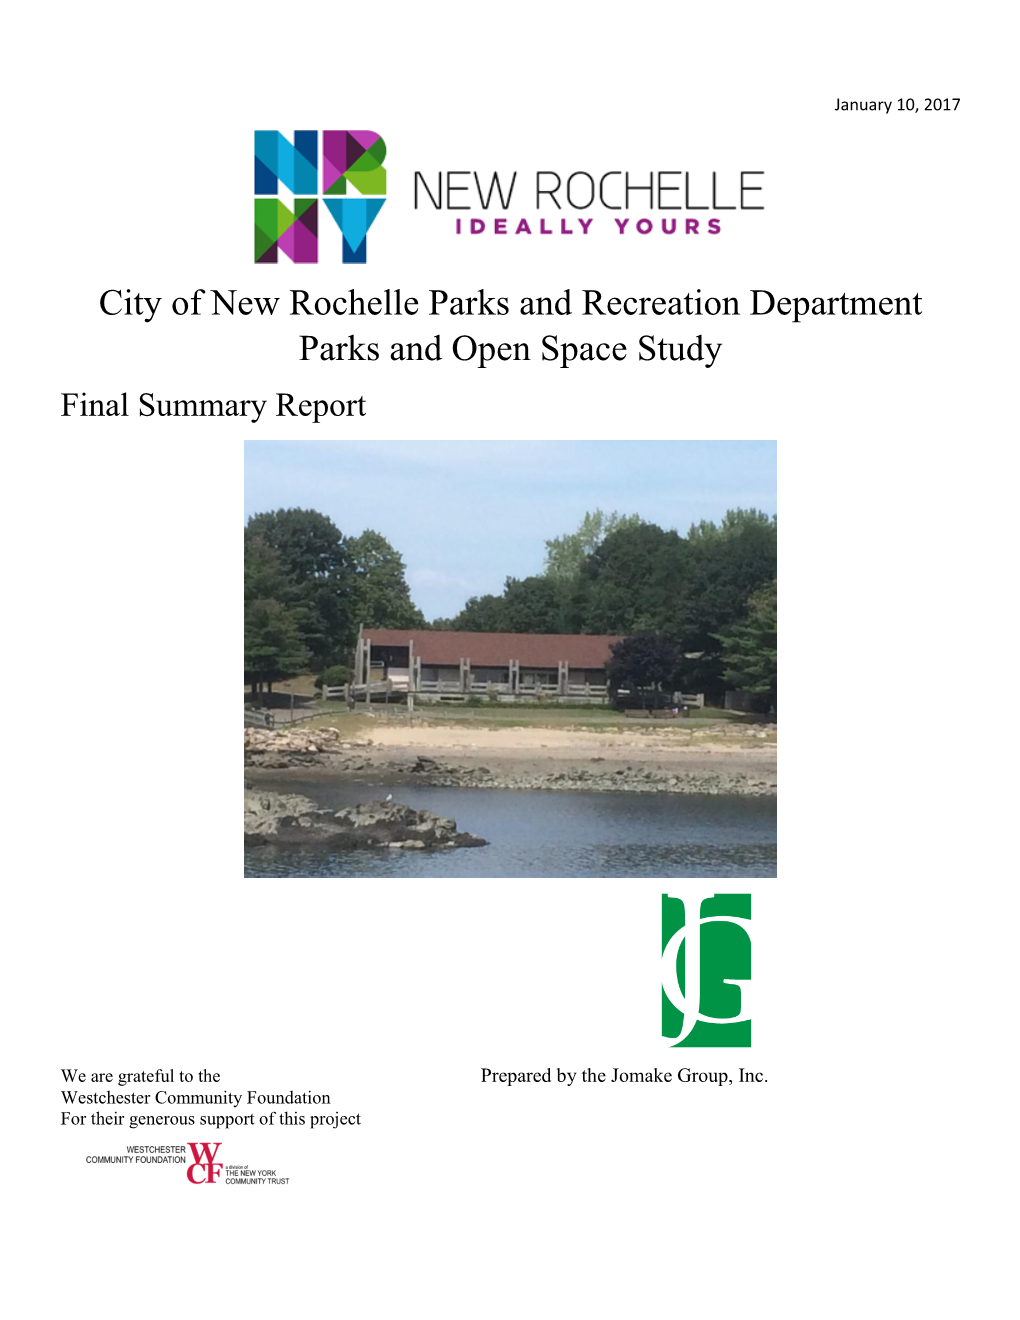 City of New Rochelle Parks and Recreation Department Parks and Open Space Study Final Summary Report